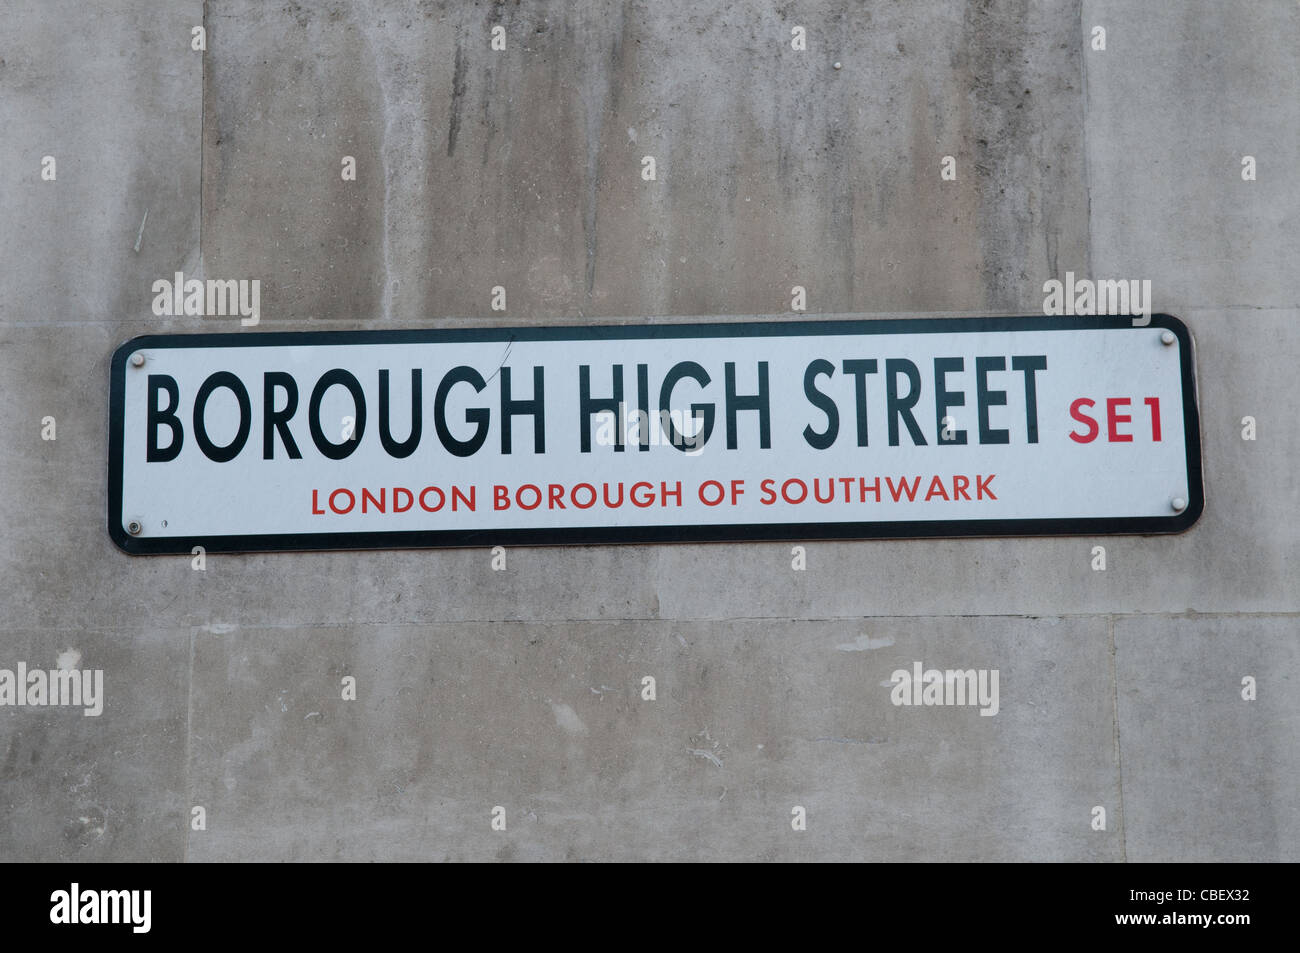 Borough High Street Sign, Londres, Angleterre, Royaume-Uni Banque D'Images